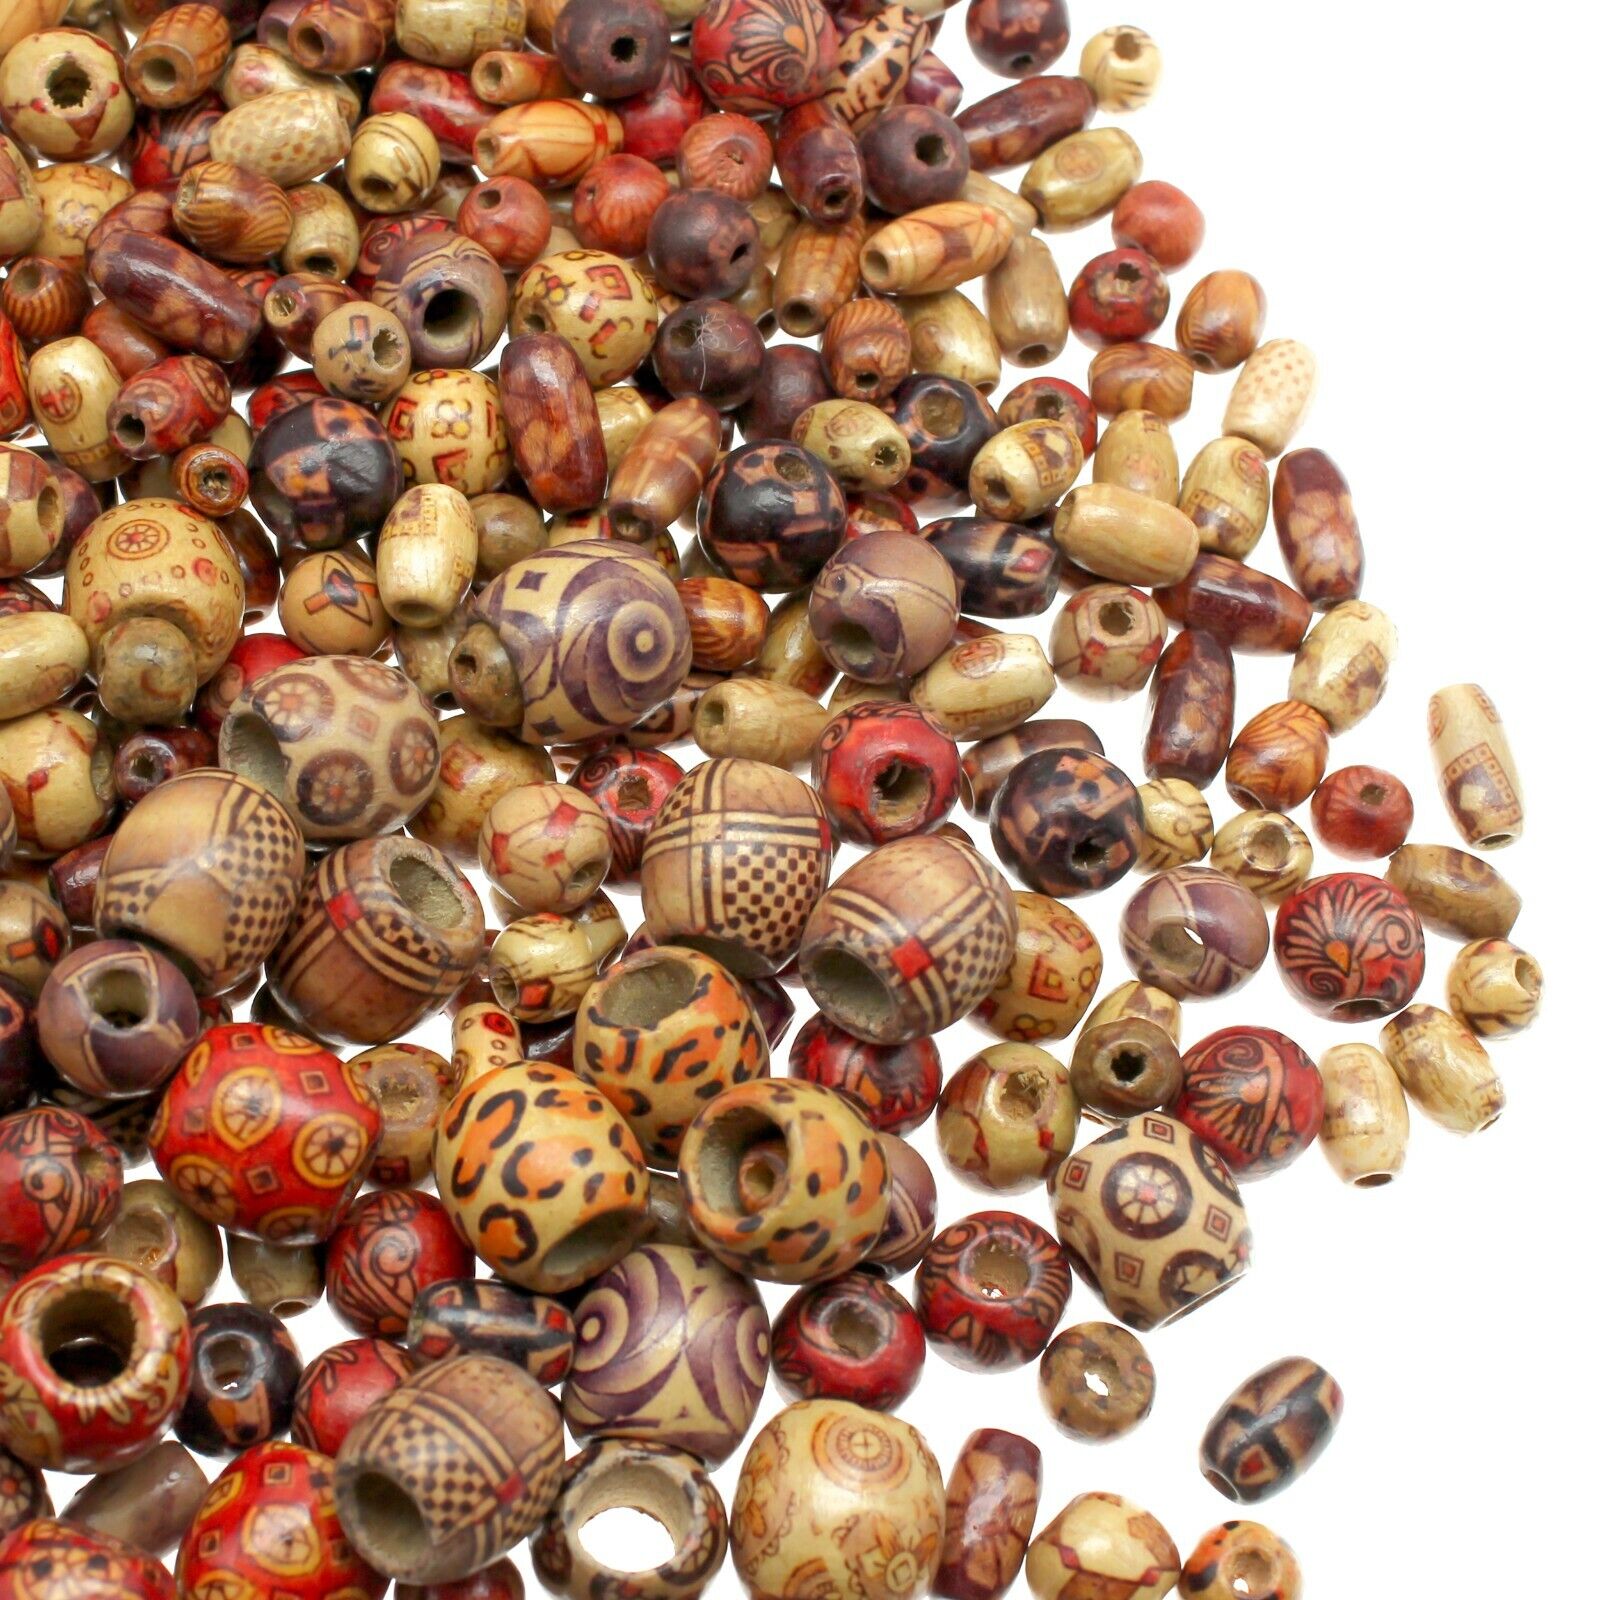 500 Wooden Beads for Jewelry Making - Painted Assorted African Beads